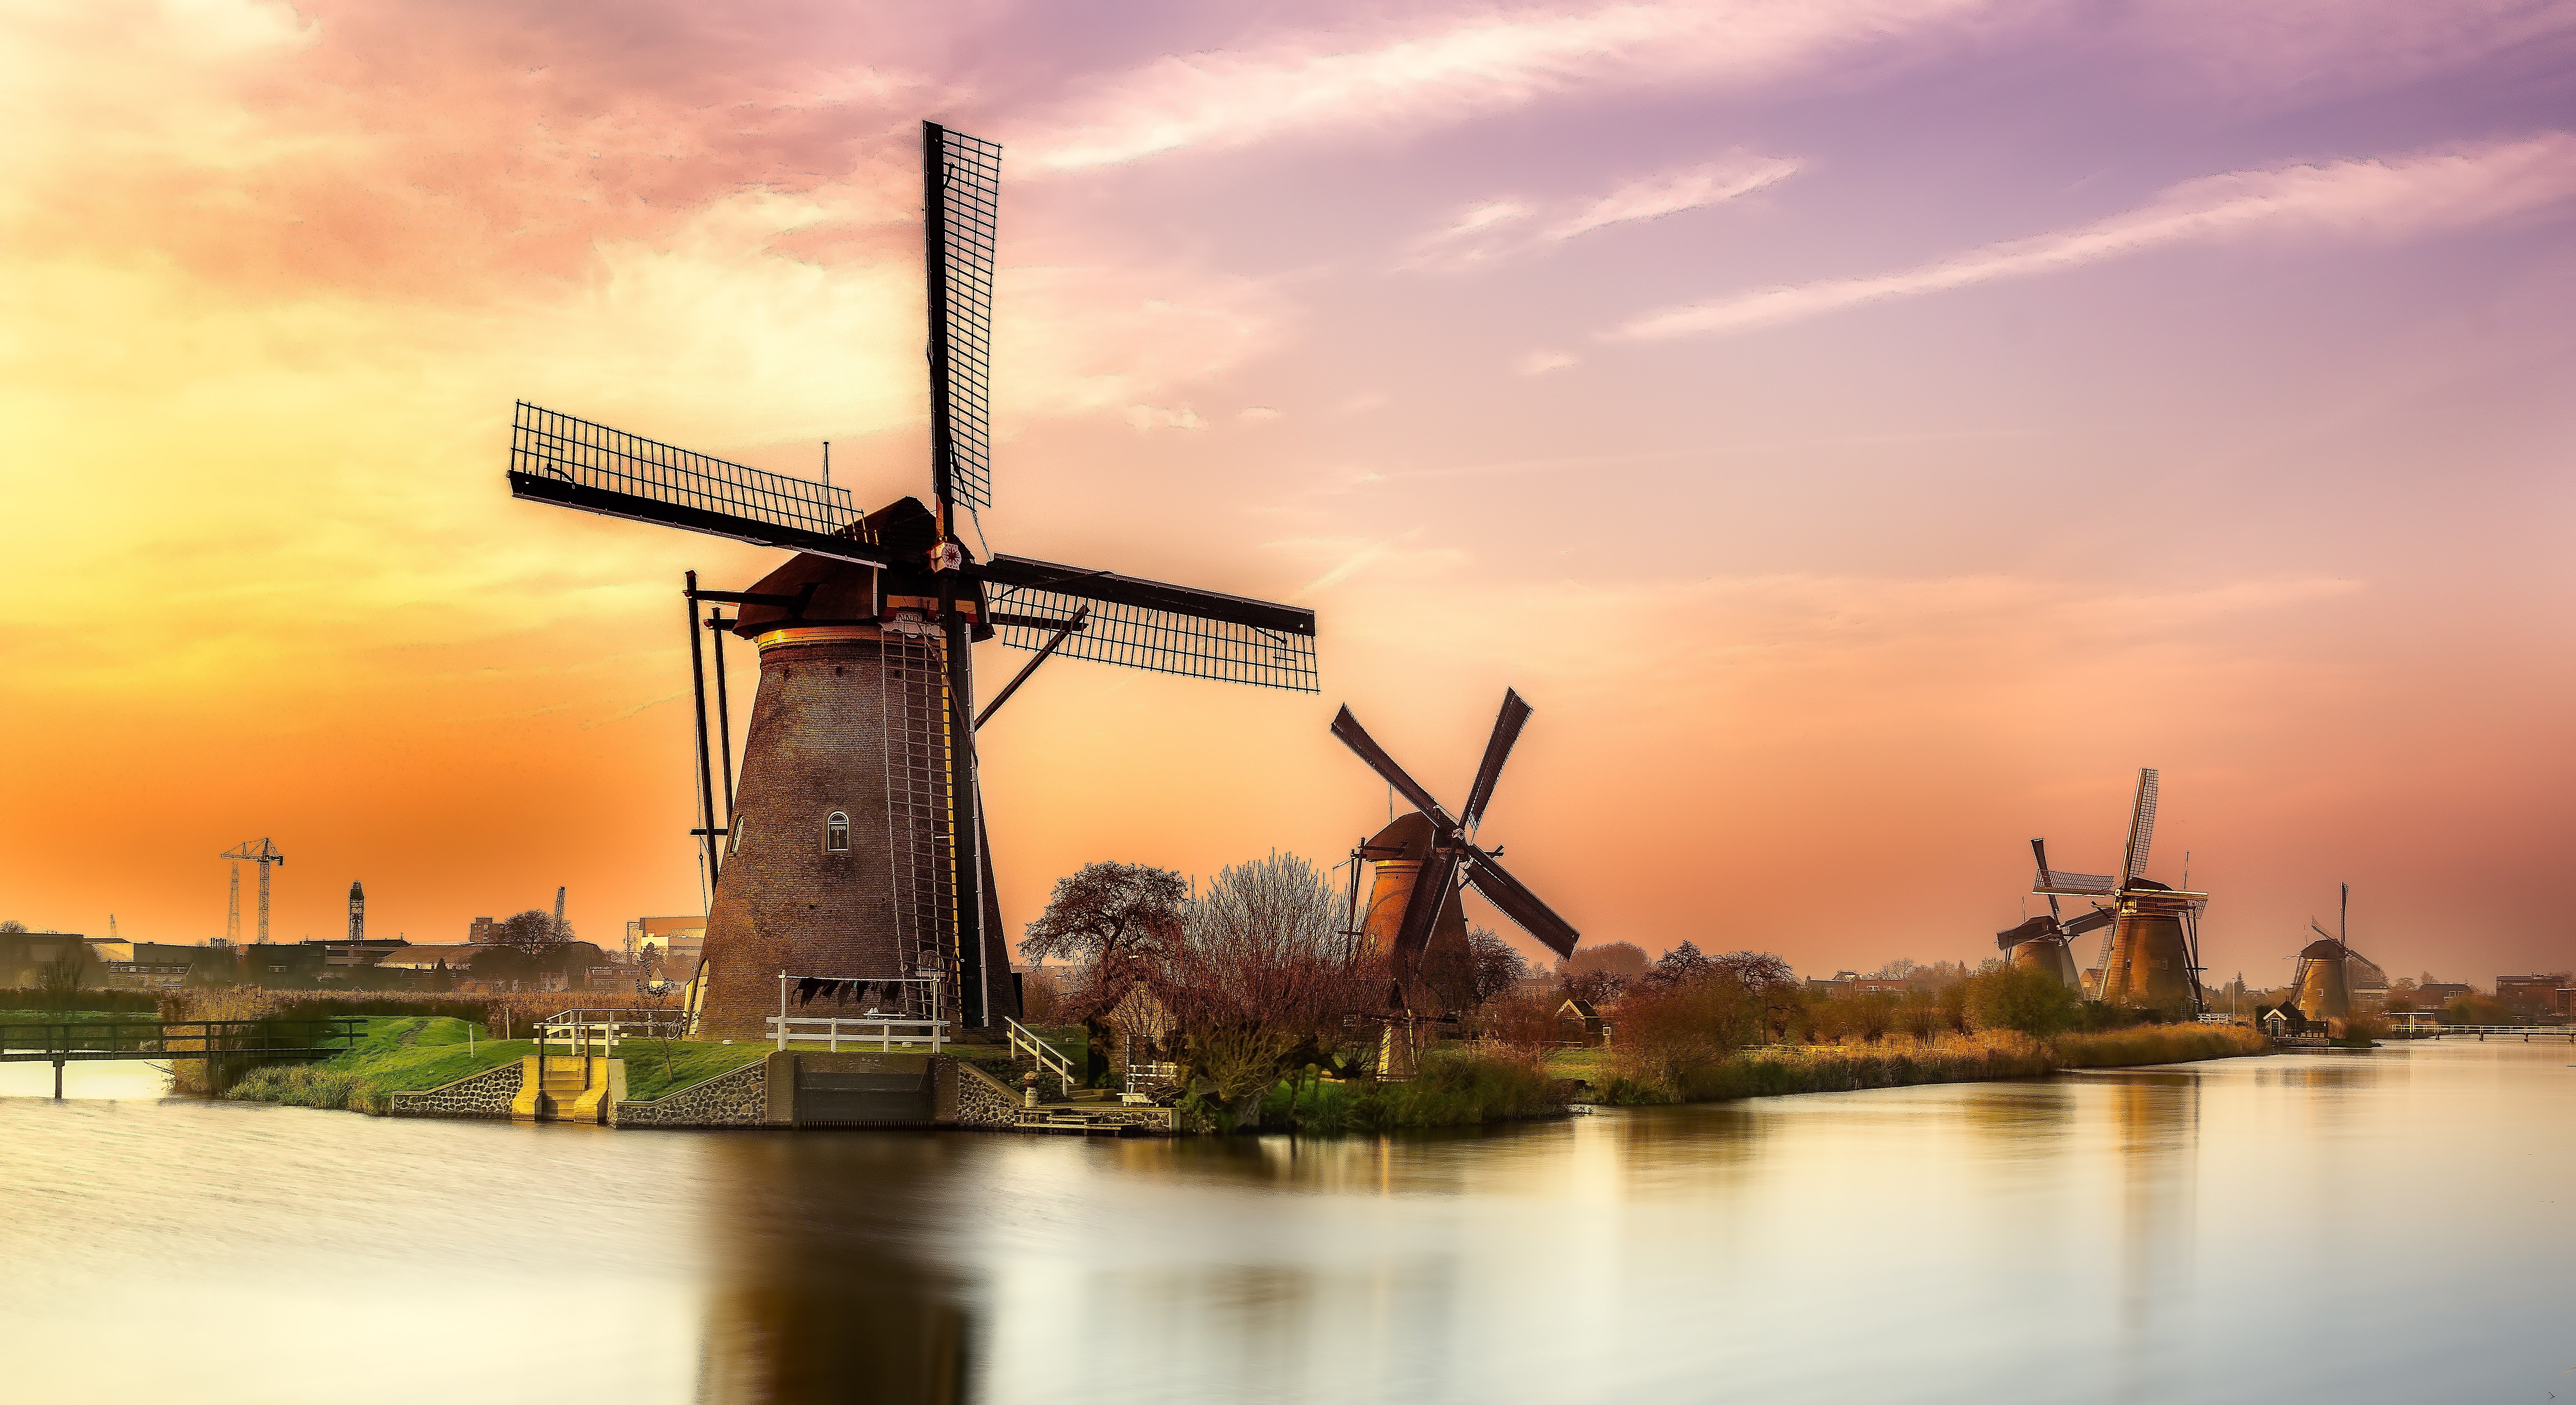 Nice HD Wallpaper S Collection Of Holland Top